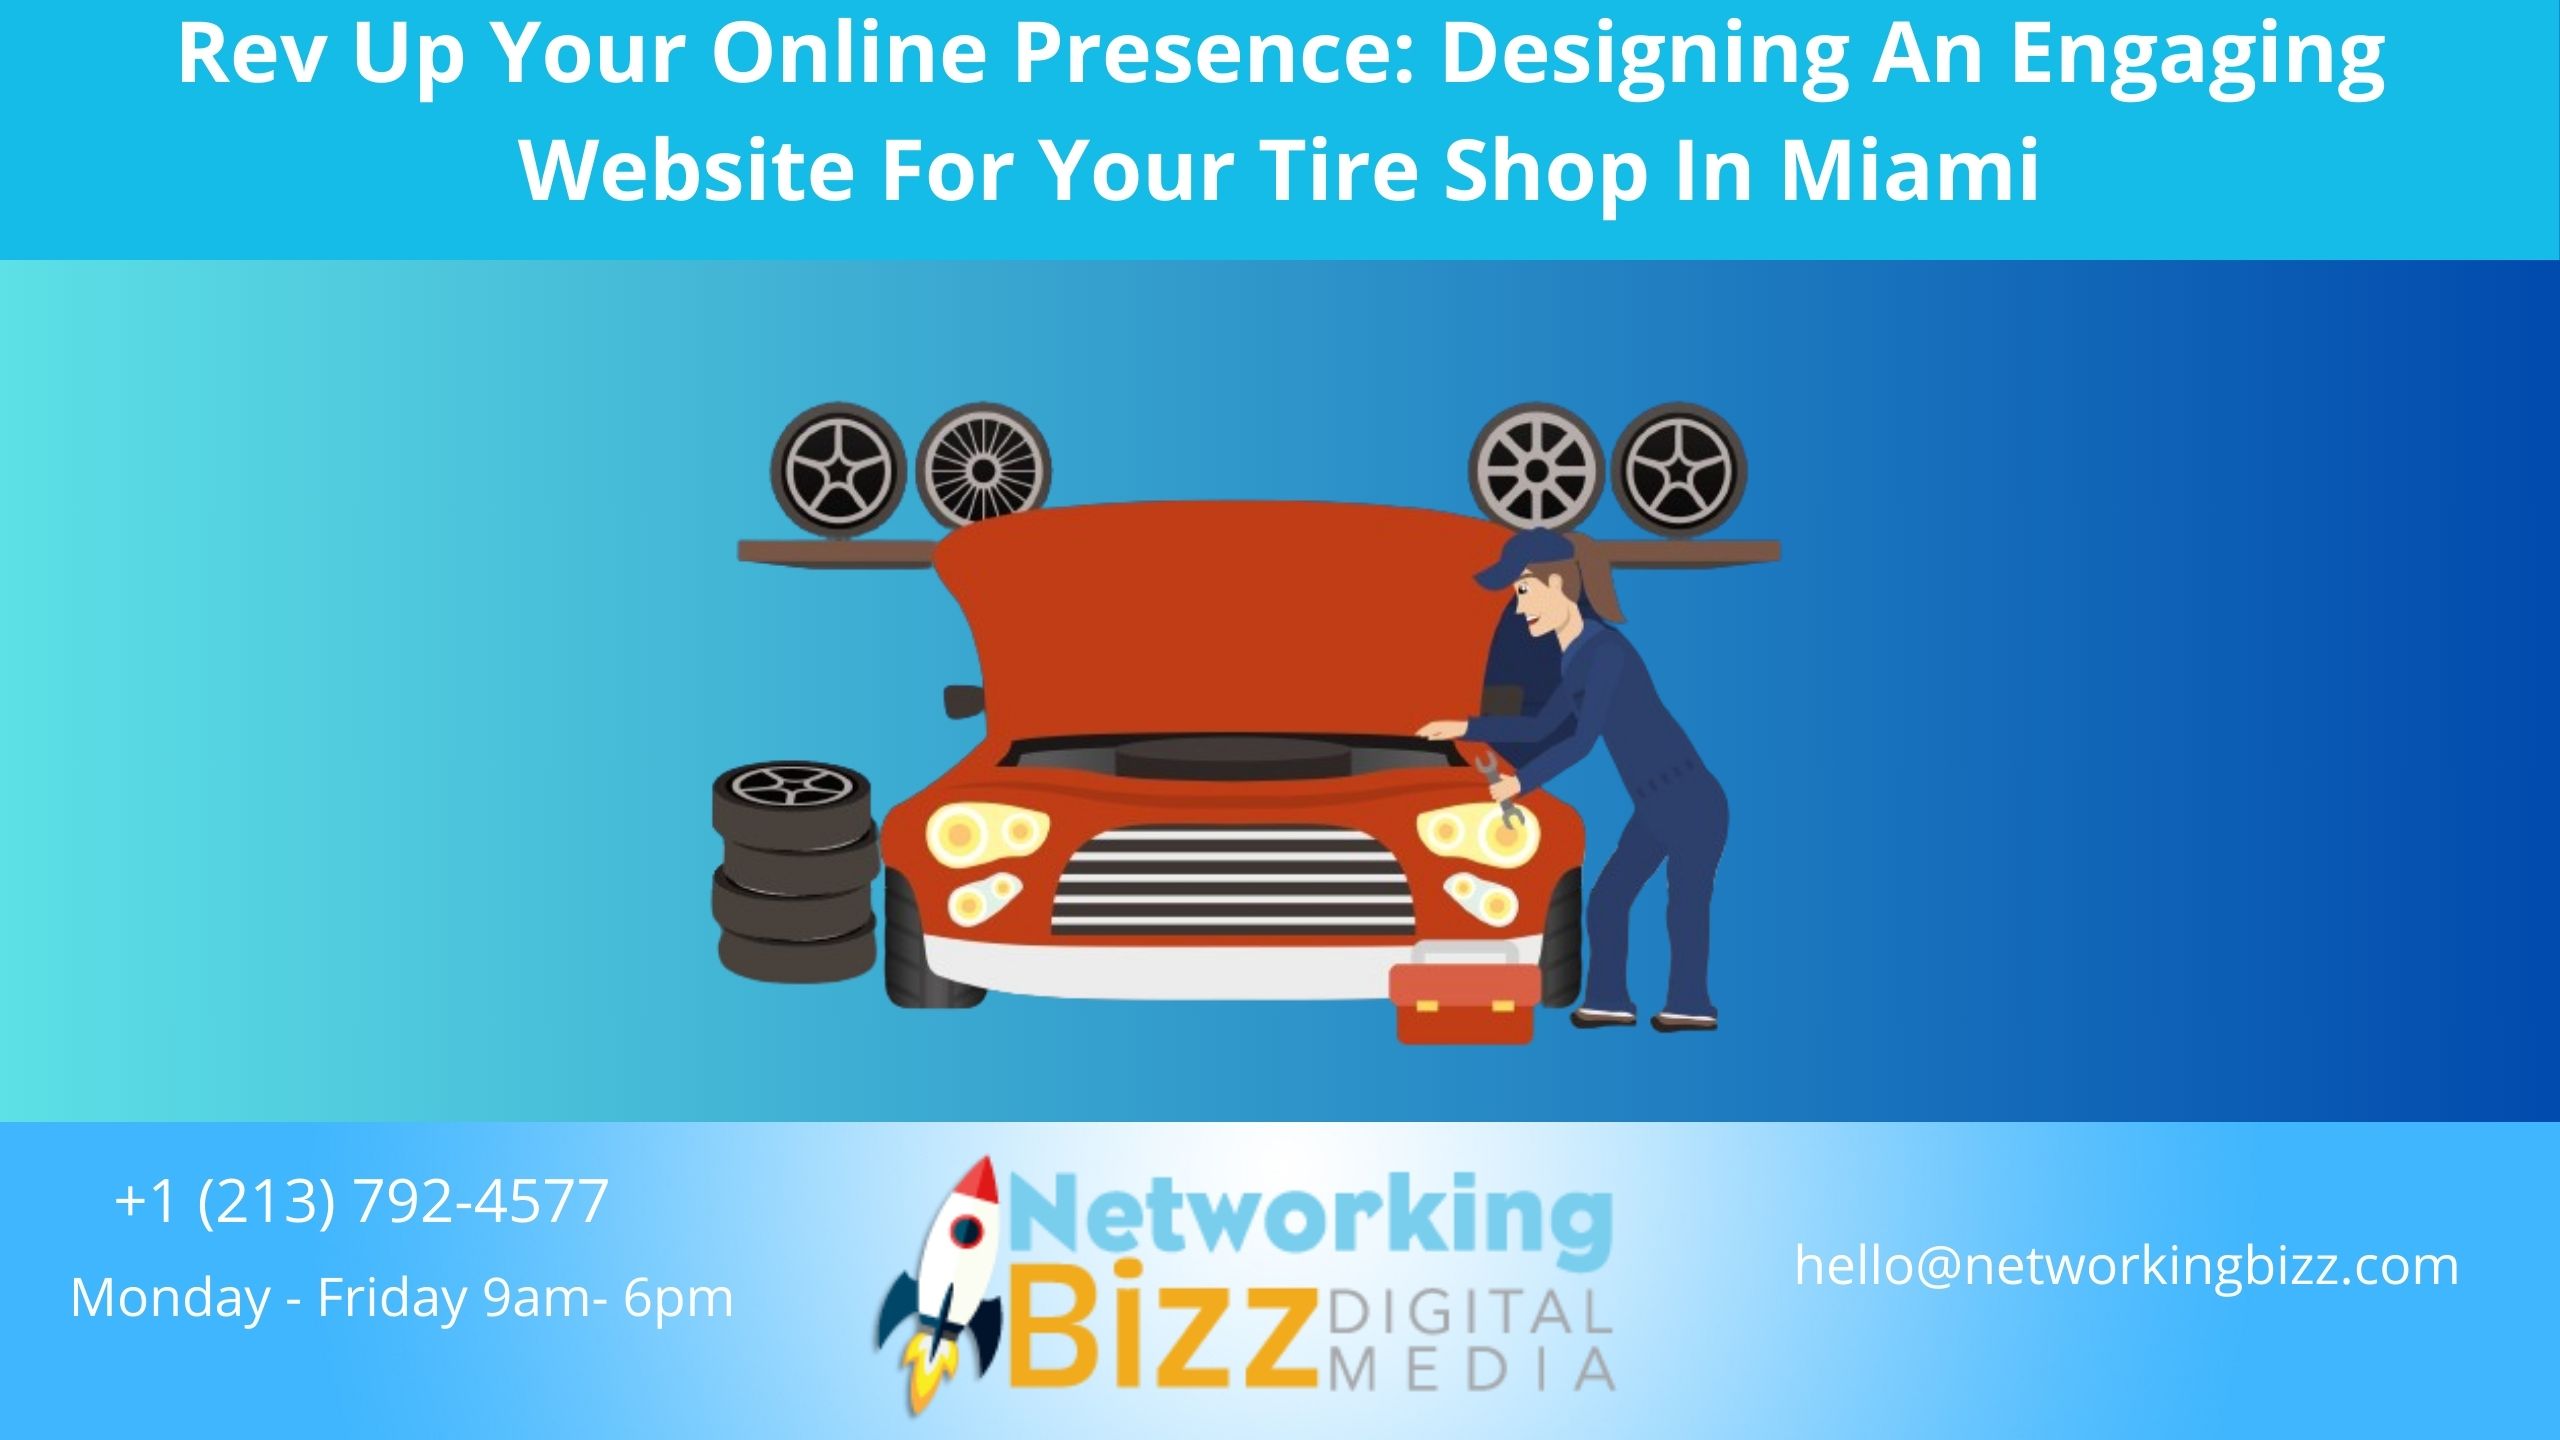 Rev Up Your Online Presence: Designing An Engaging Website For Your Tire Shop In Miami